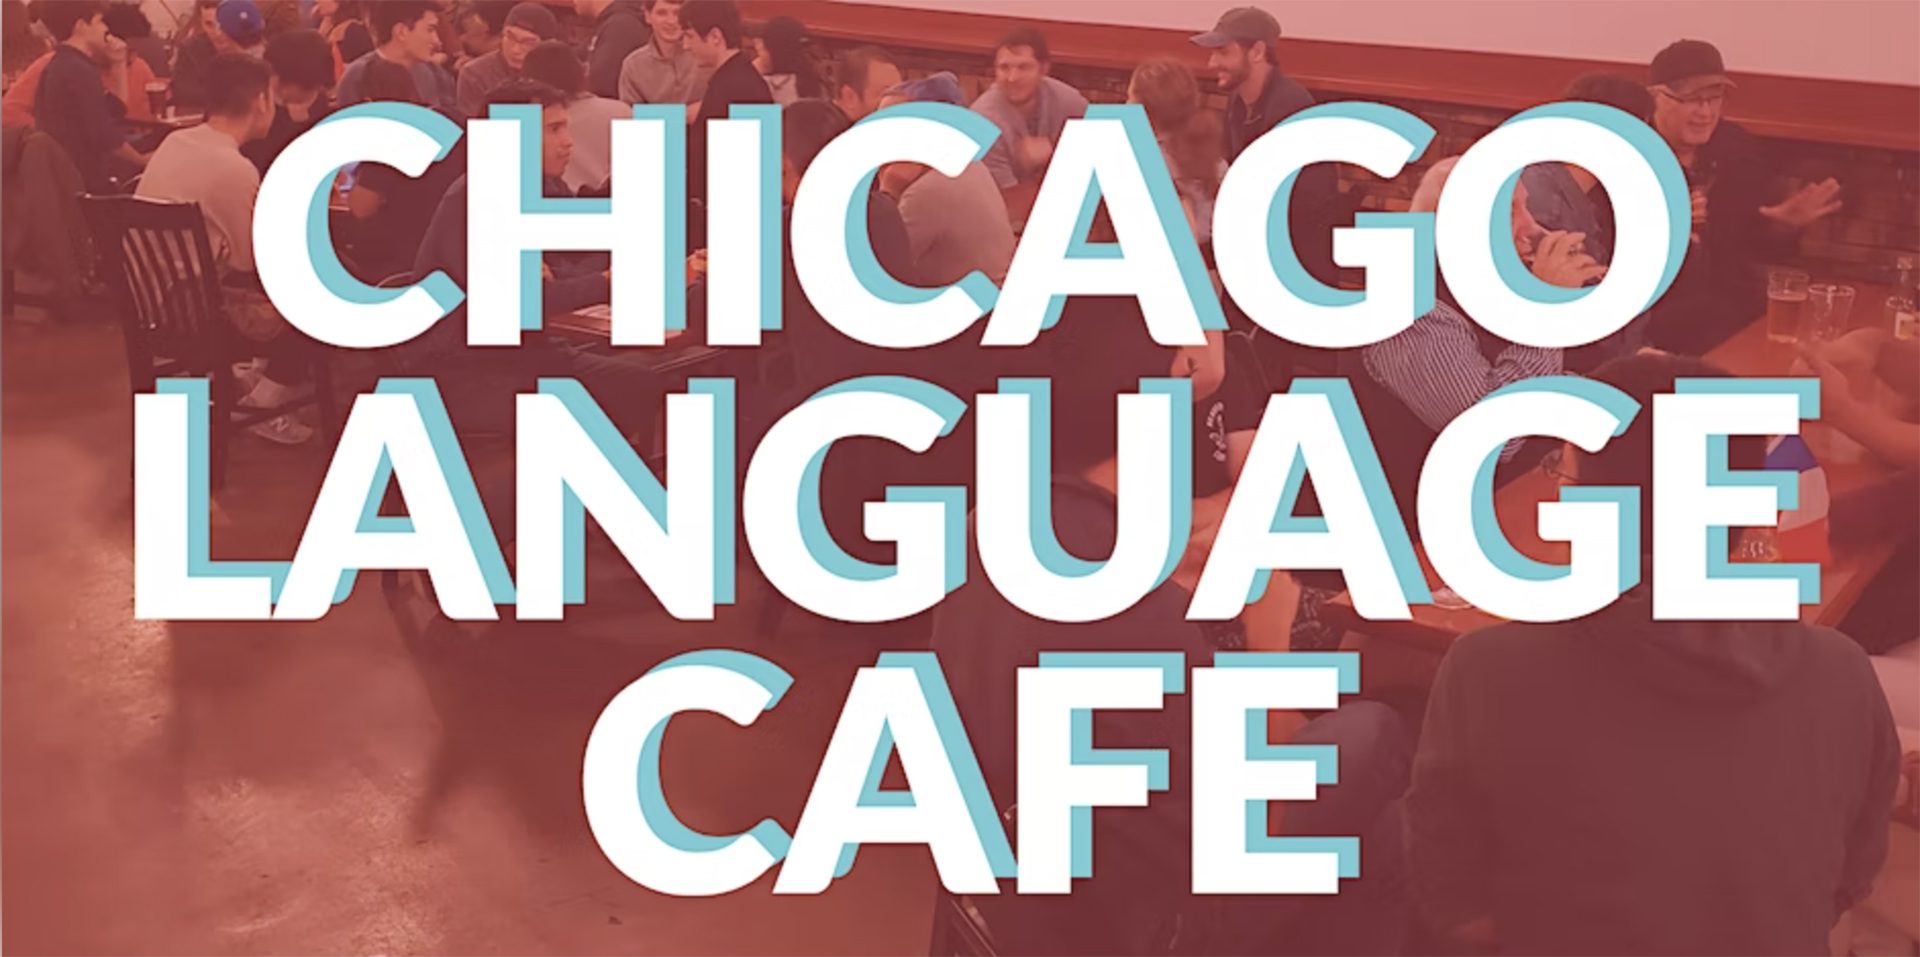 "Chicago Language Cafe" written over a red image of people sitting and talking around tables